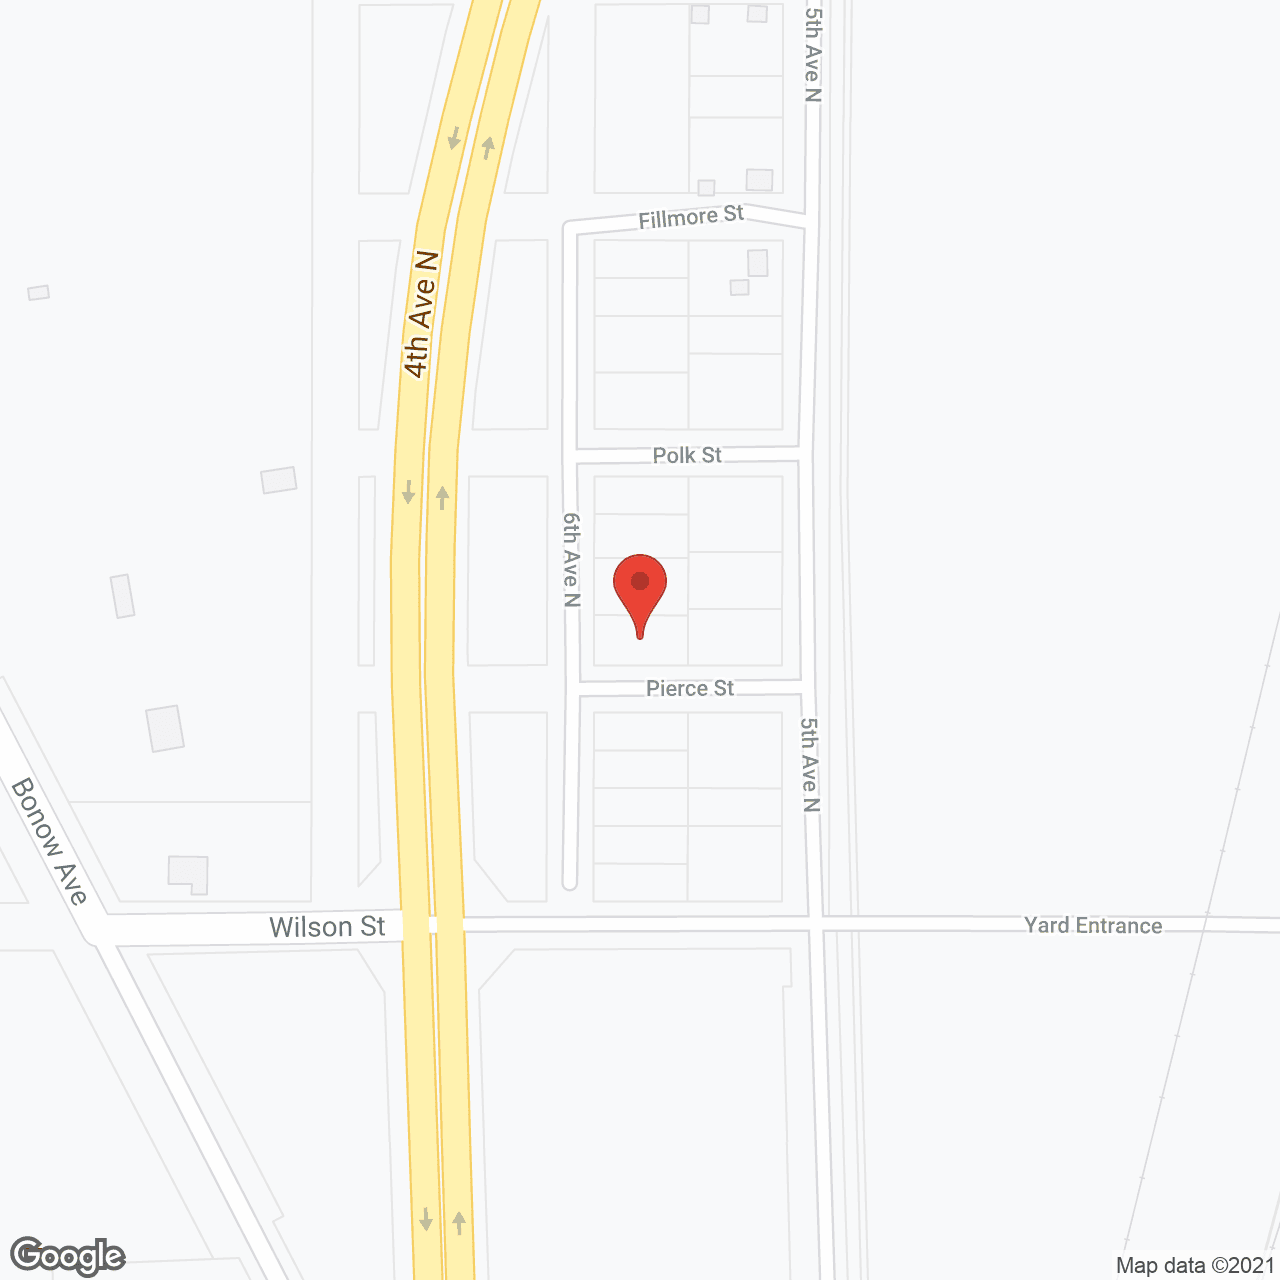 Quality Care Home in google map